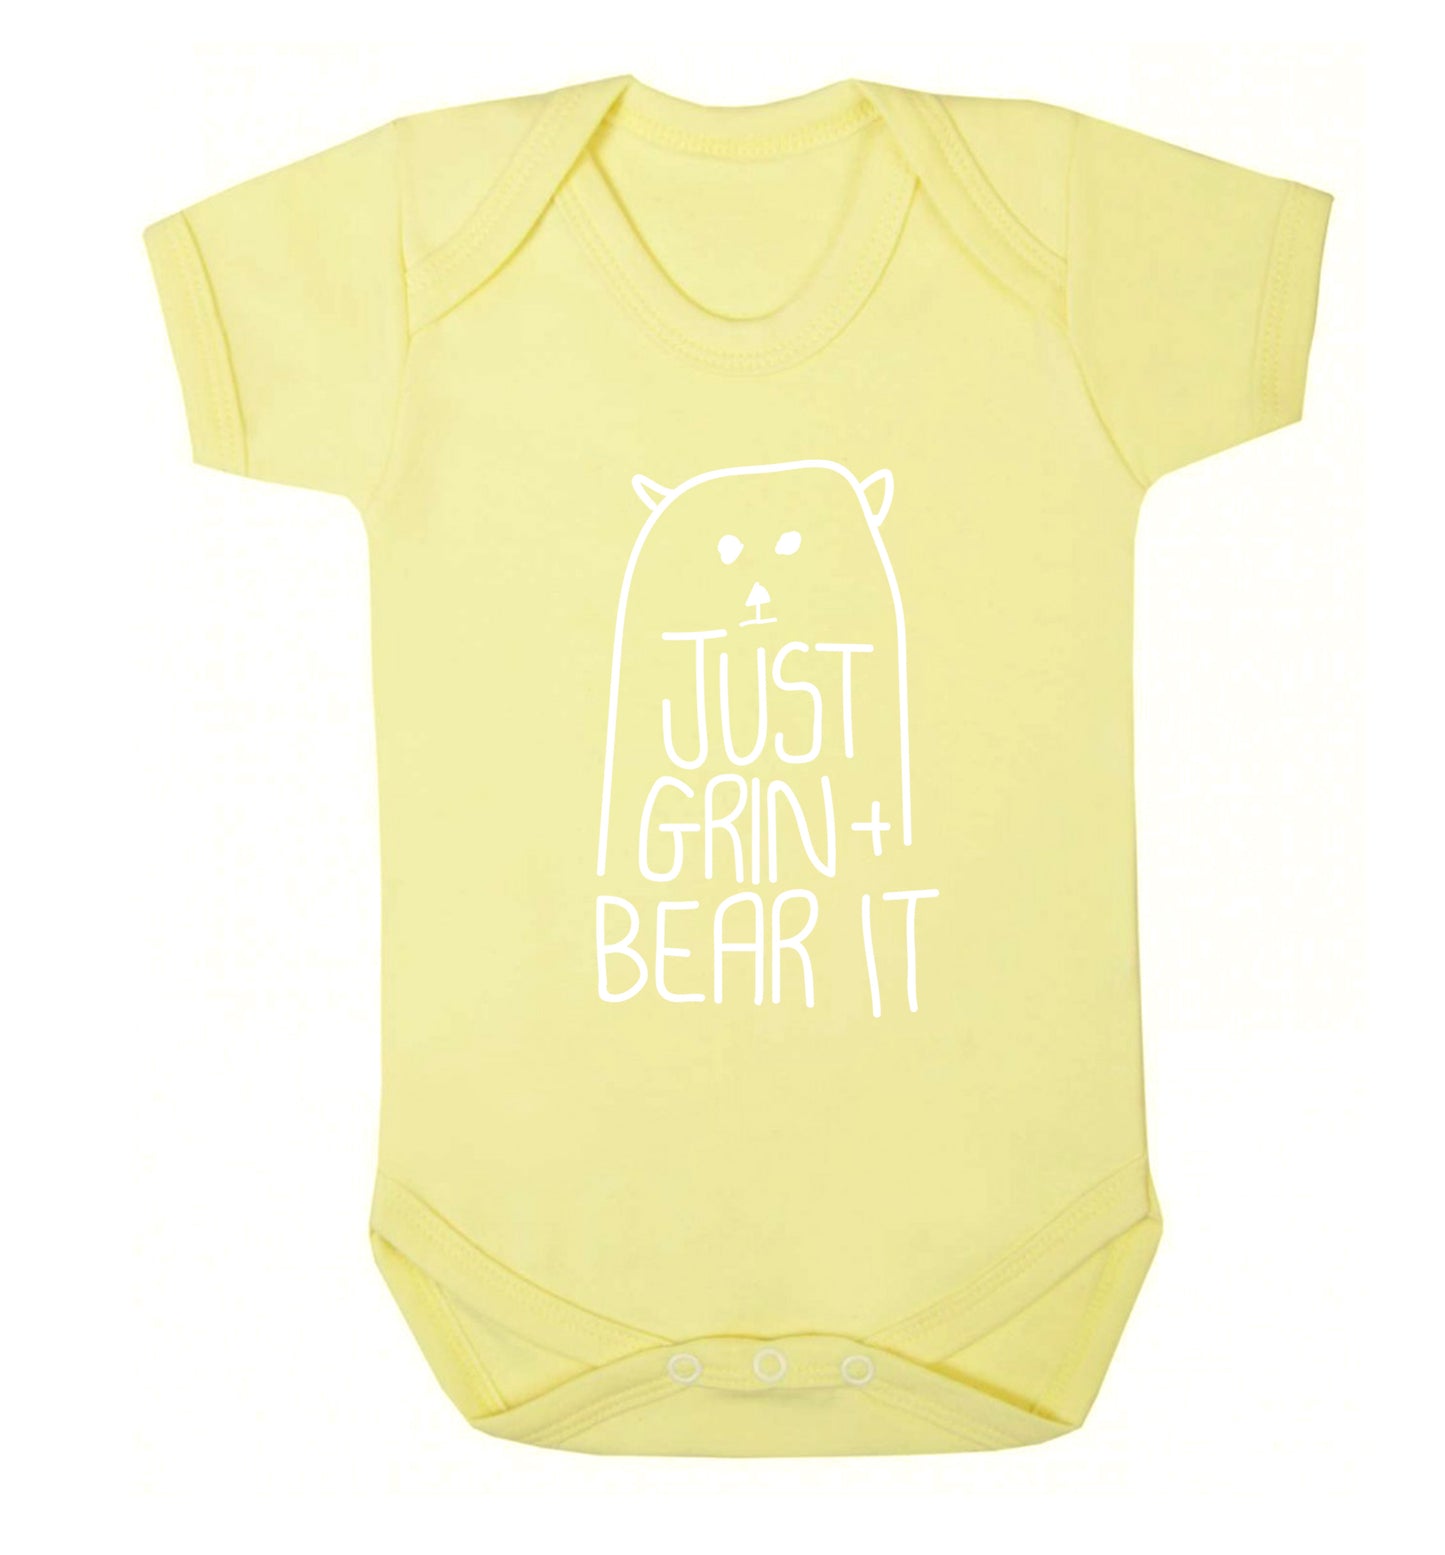 Just grin and bear it Baby Vest pale yellow 18-24 months